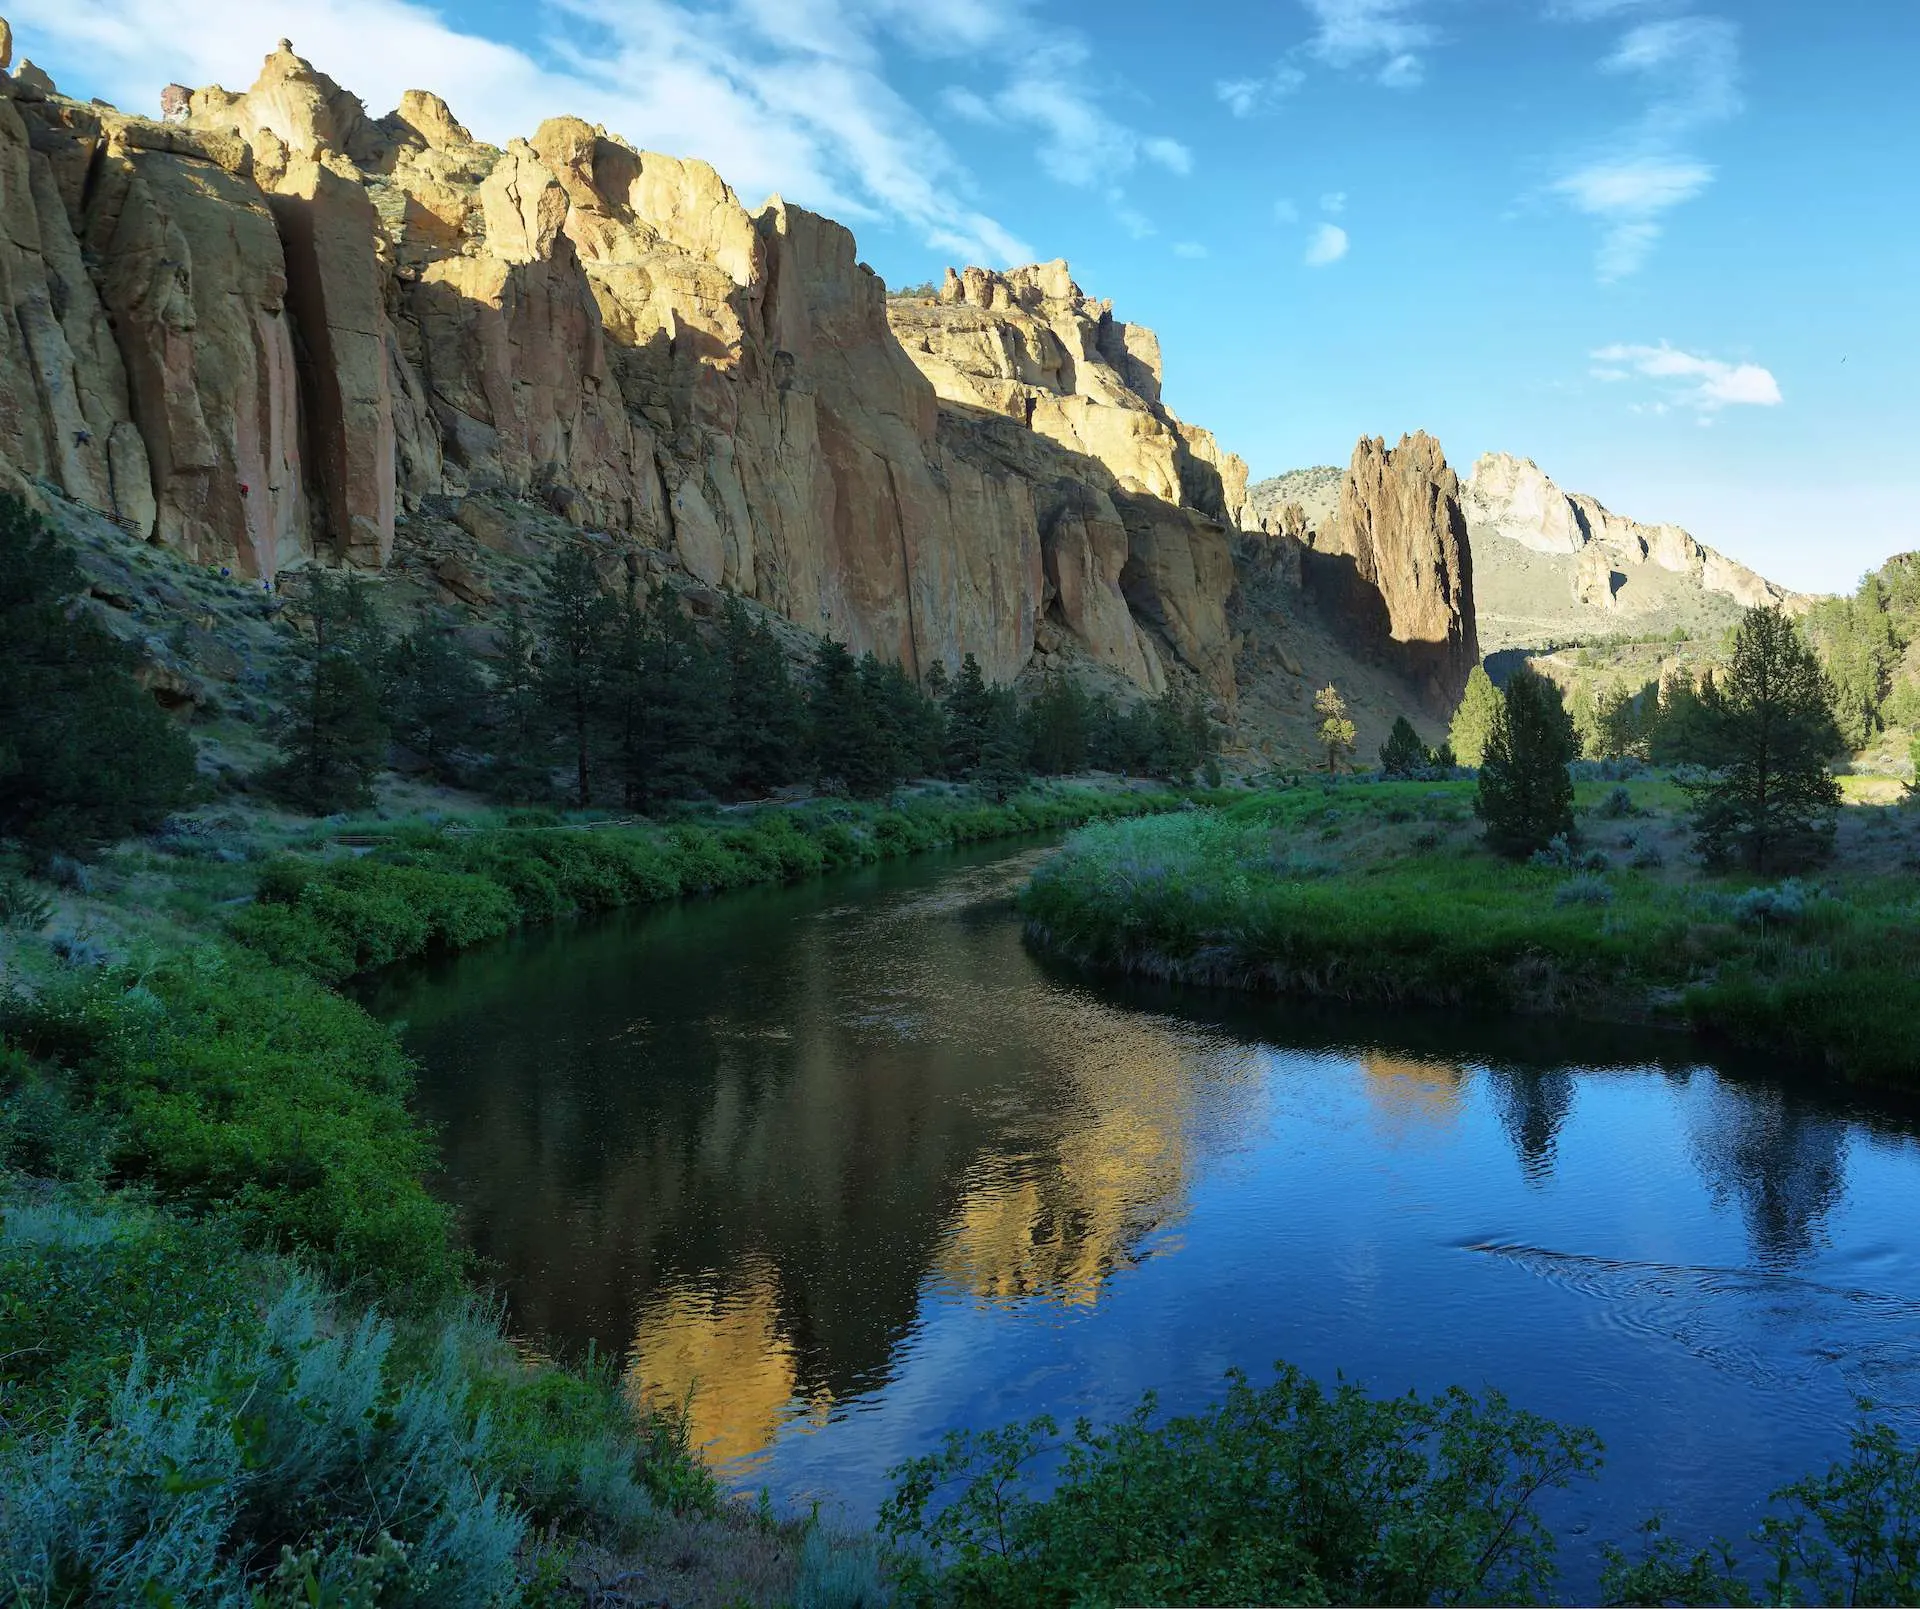 Crooked river in Smith Rock Park, Oregon